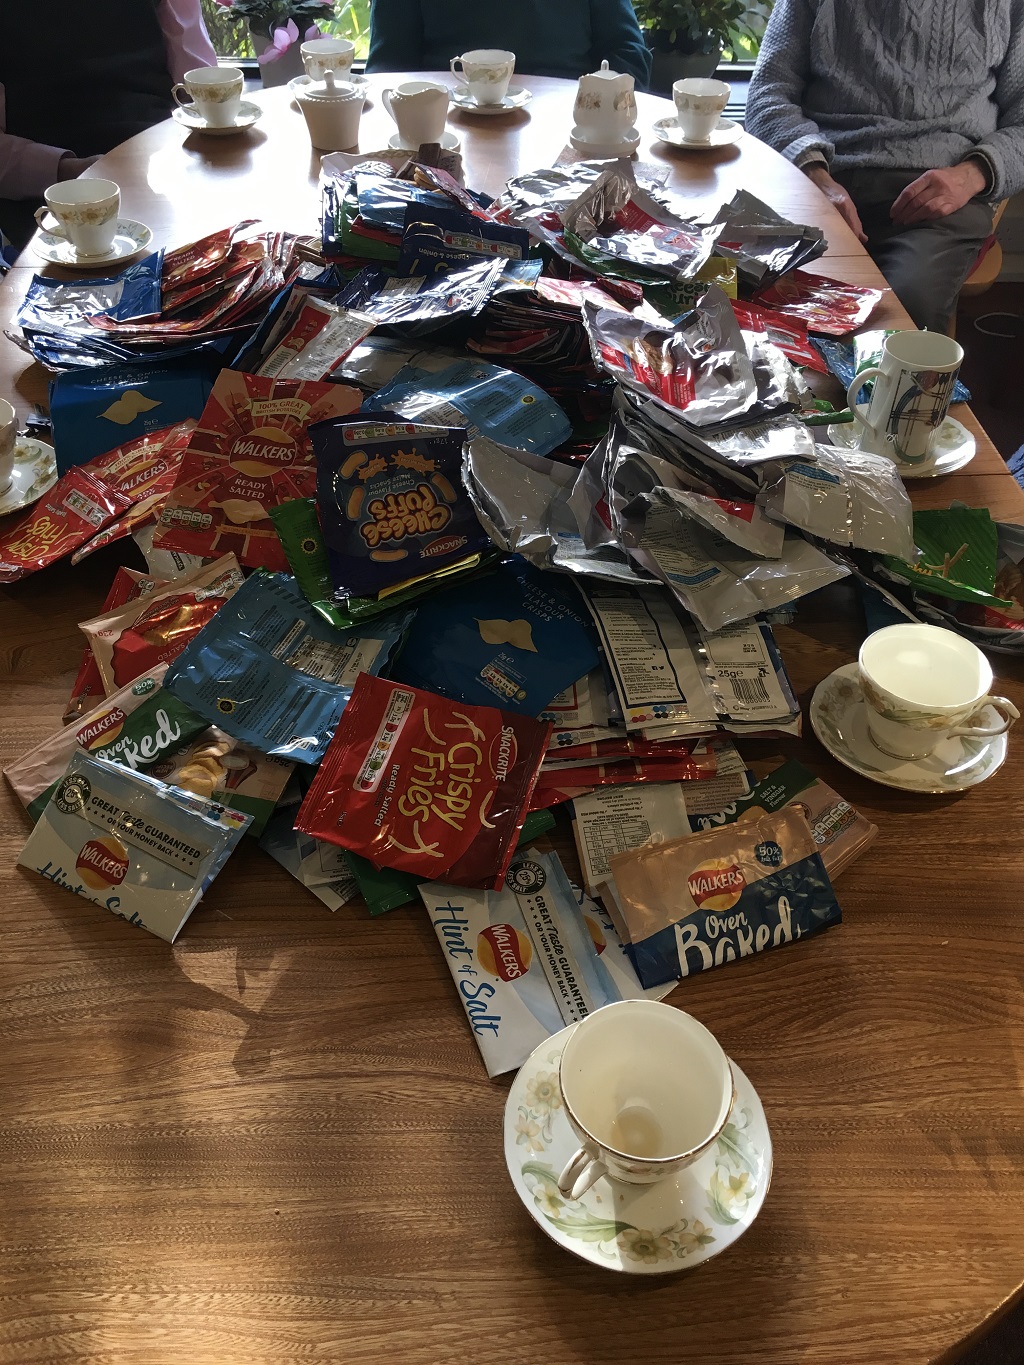 Bield residents collect crisp packets in recycling effort